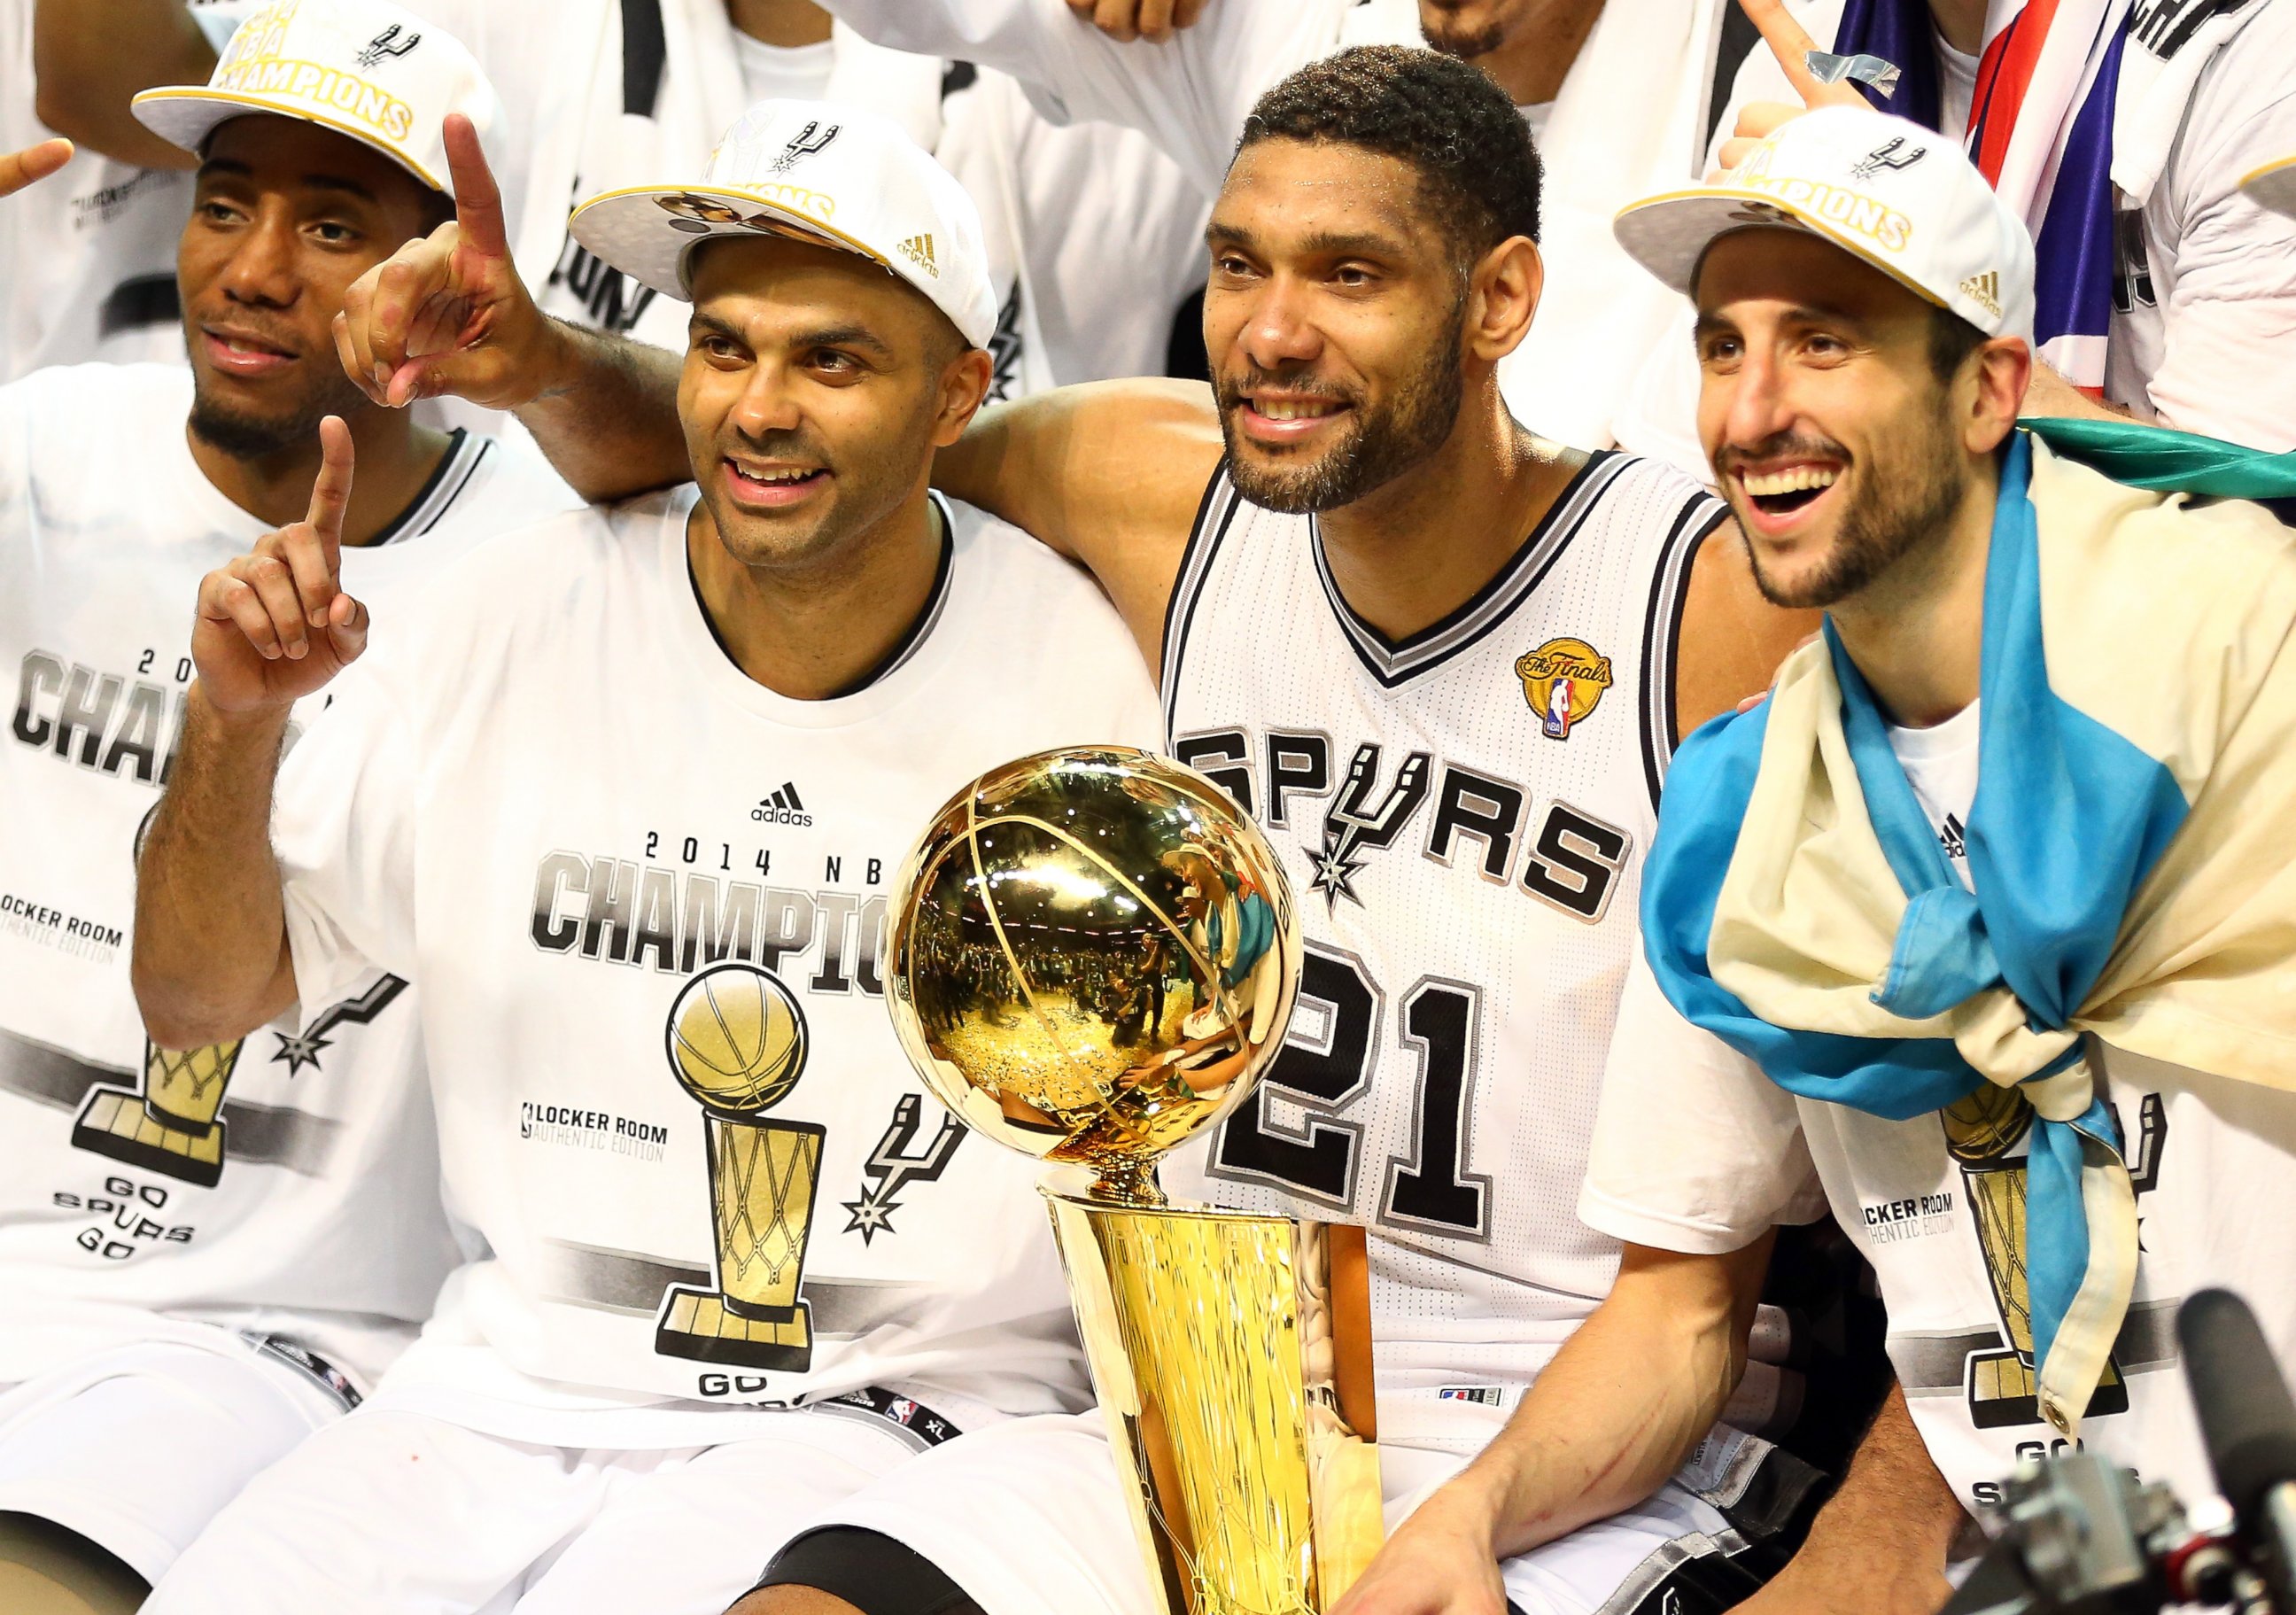 The San Antonio Spurs celebrate with the Larry O'Brien trophy